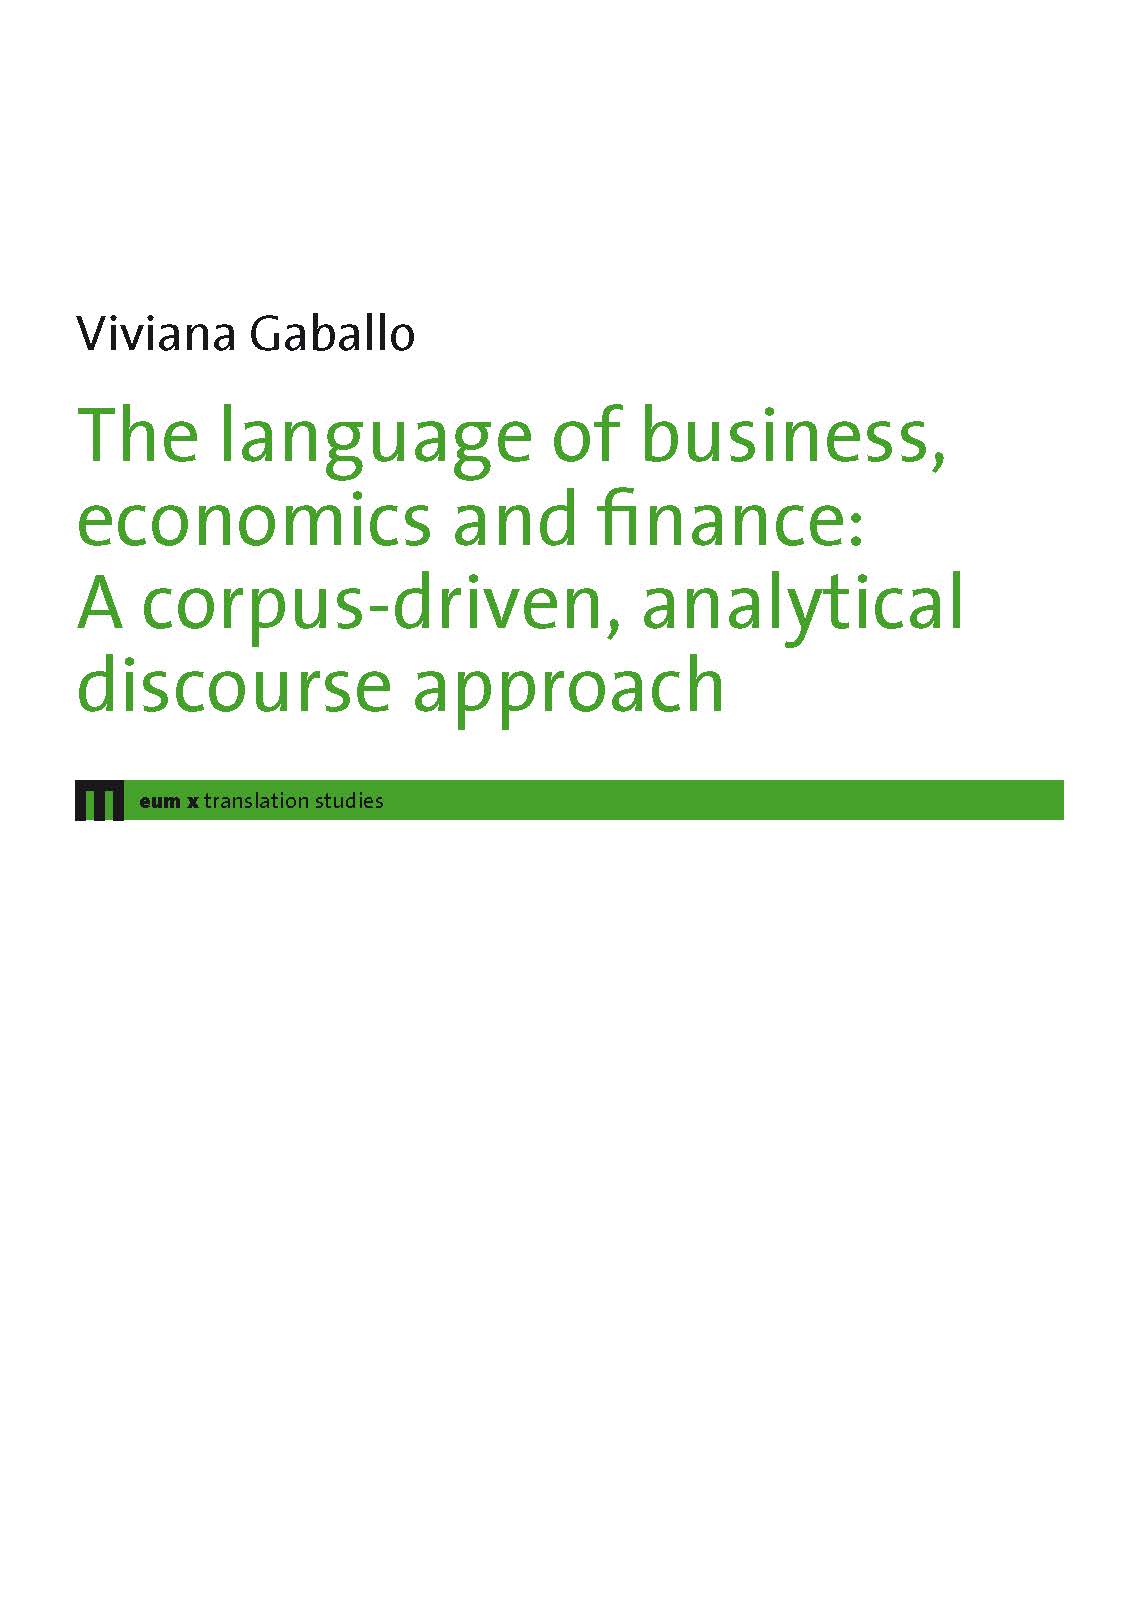 The language of business, economics and finance: A corpus-driven, analytical discourse approach